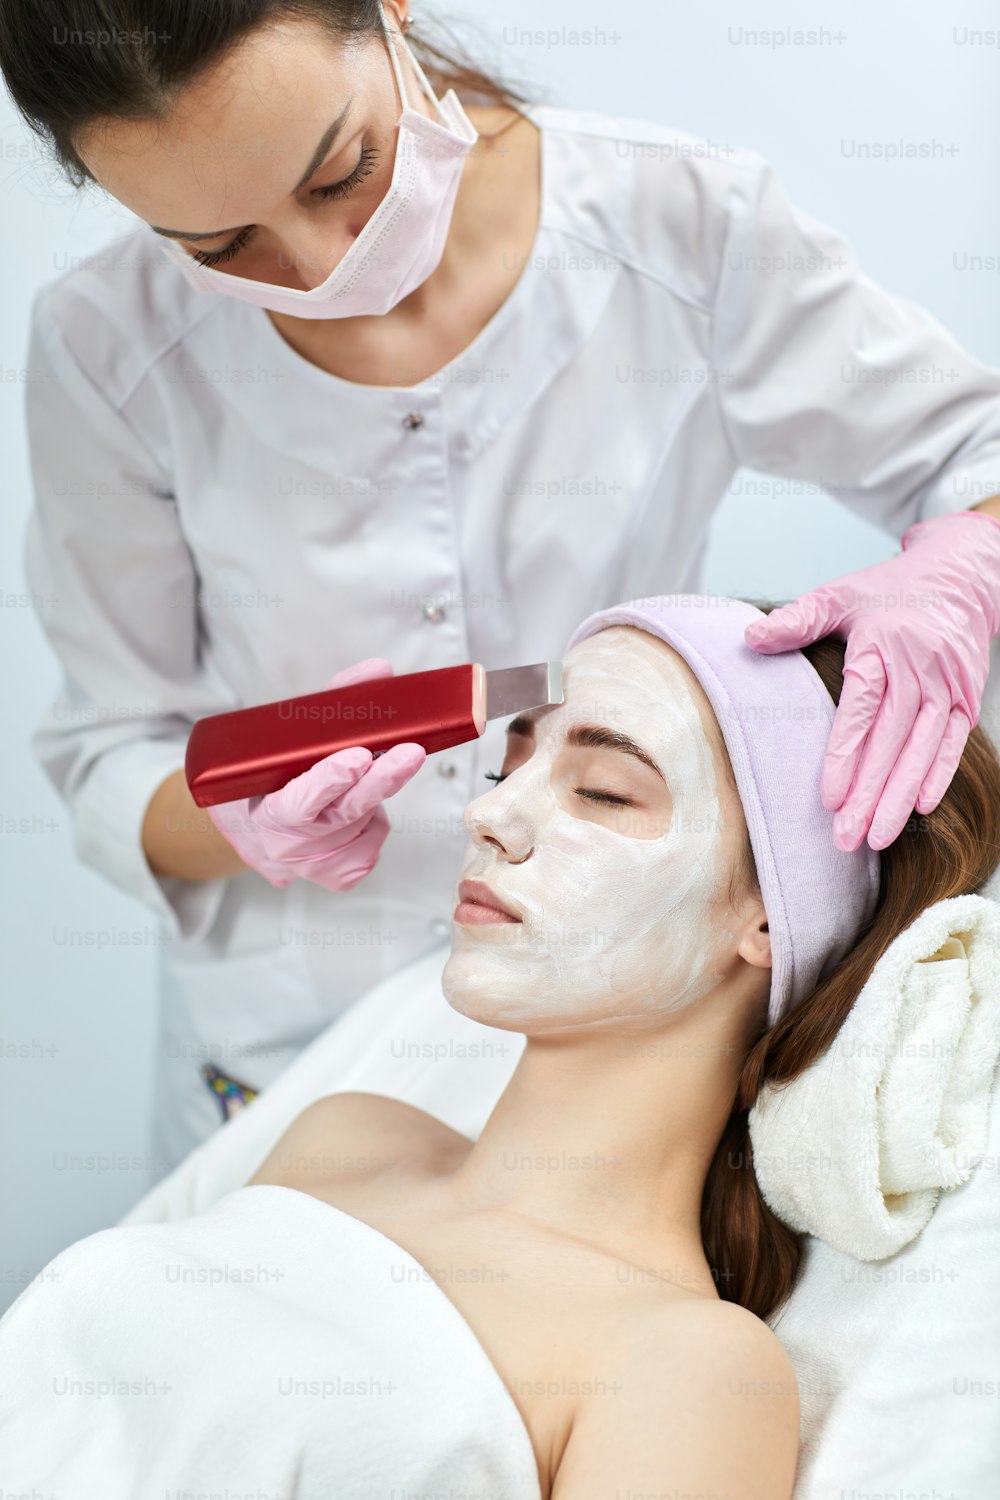 beautician makes procedure ultrasound cleansing of woman's face , facial peeling. ultrasonic treatment for skin rejuvenation